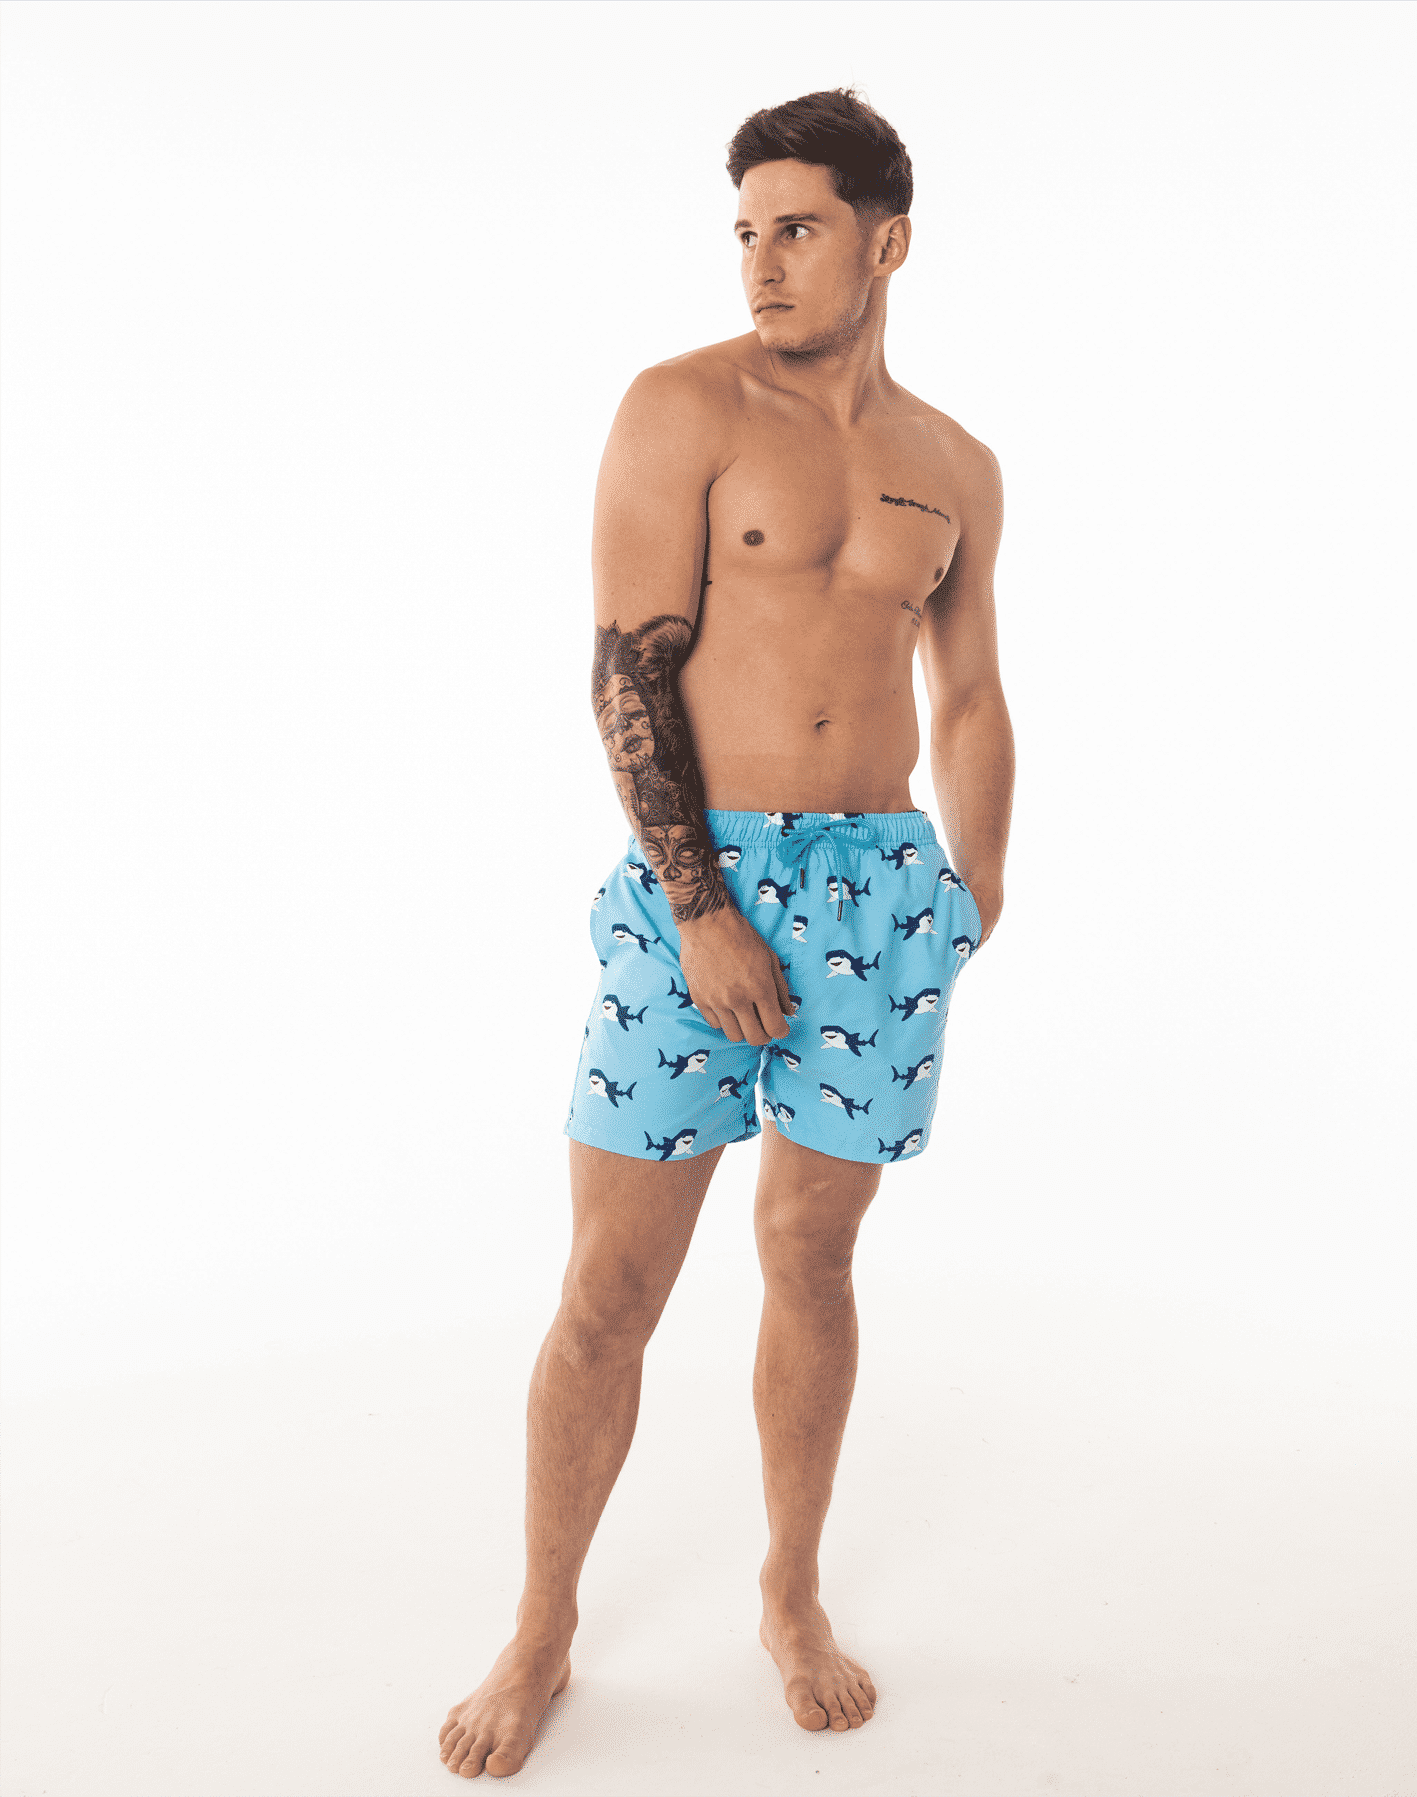 SevenC's Men's Recycled Polyester Shorts in Whale Shark Print